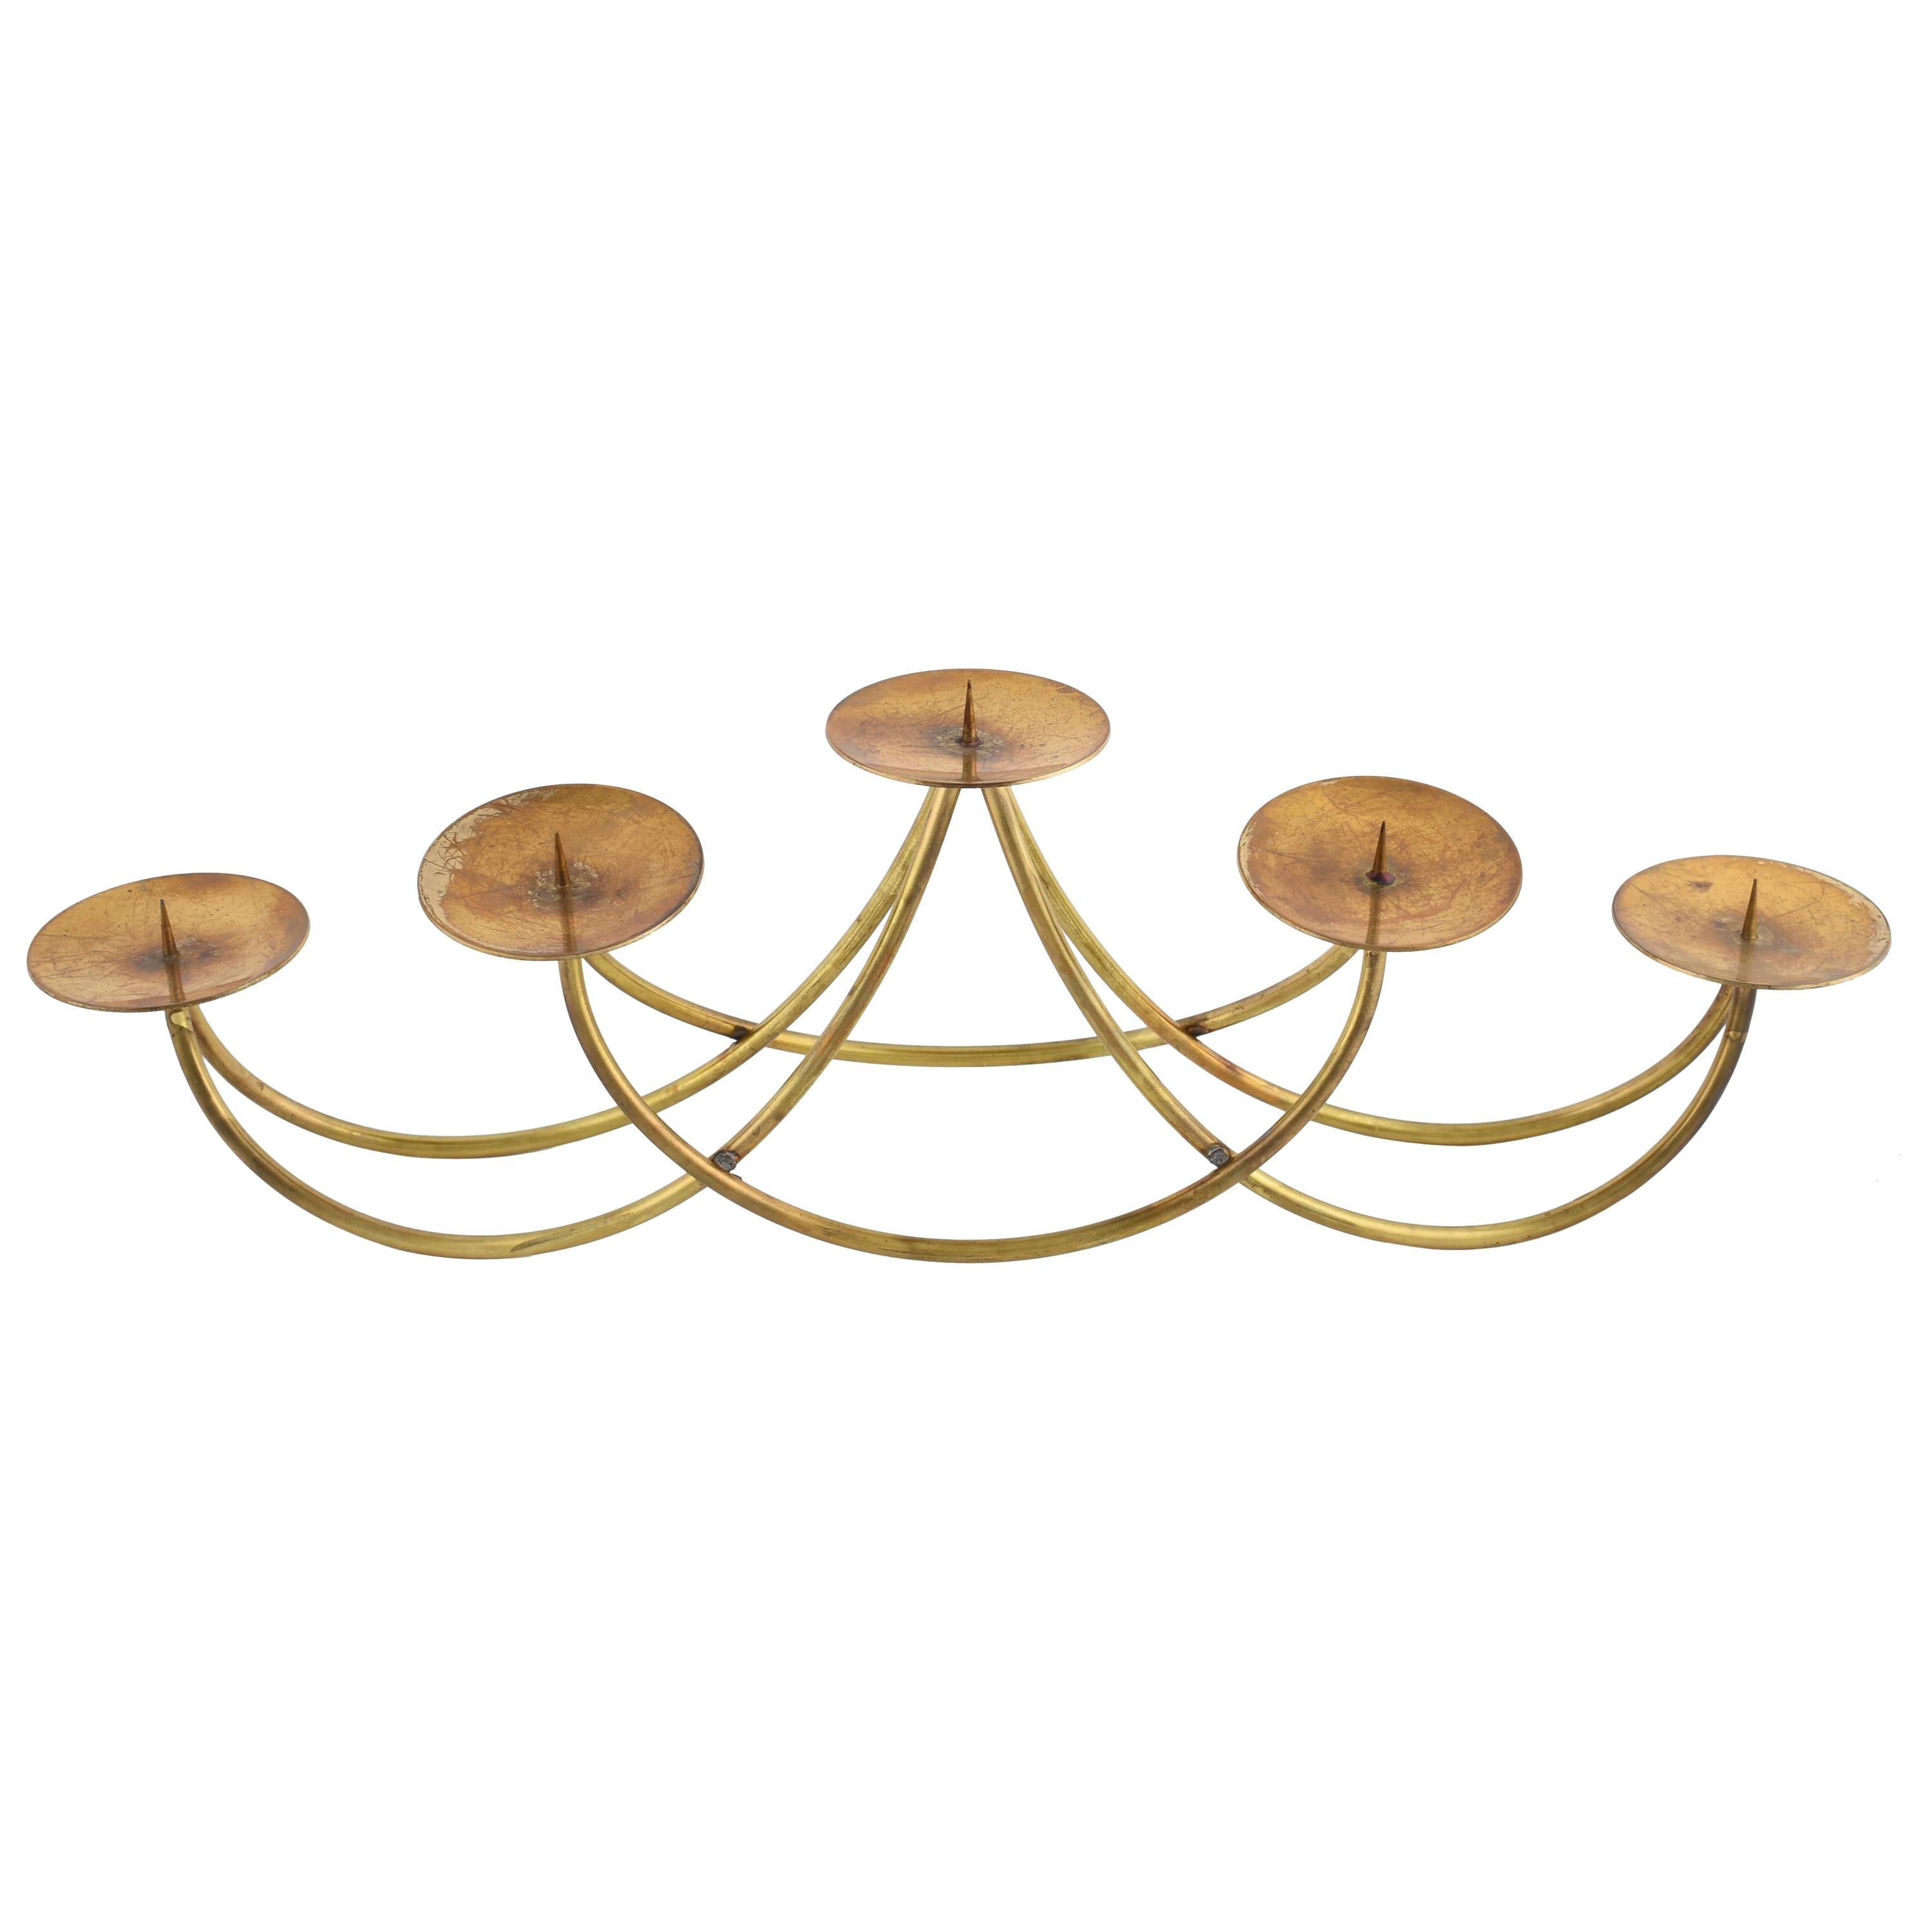 Vintage Brass Candletree by Harald Buchrucker, Germany, 1950s